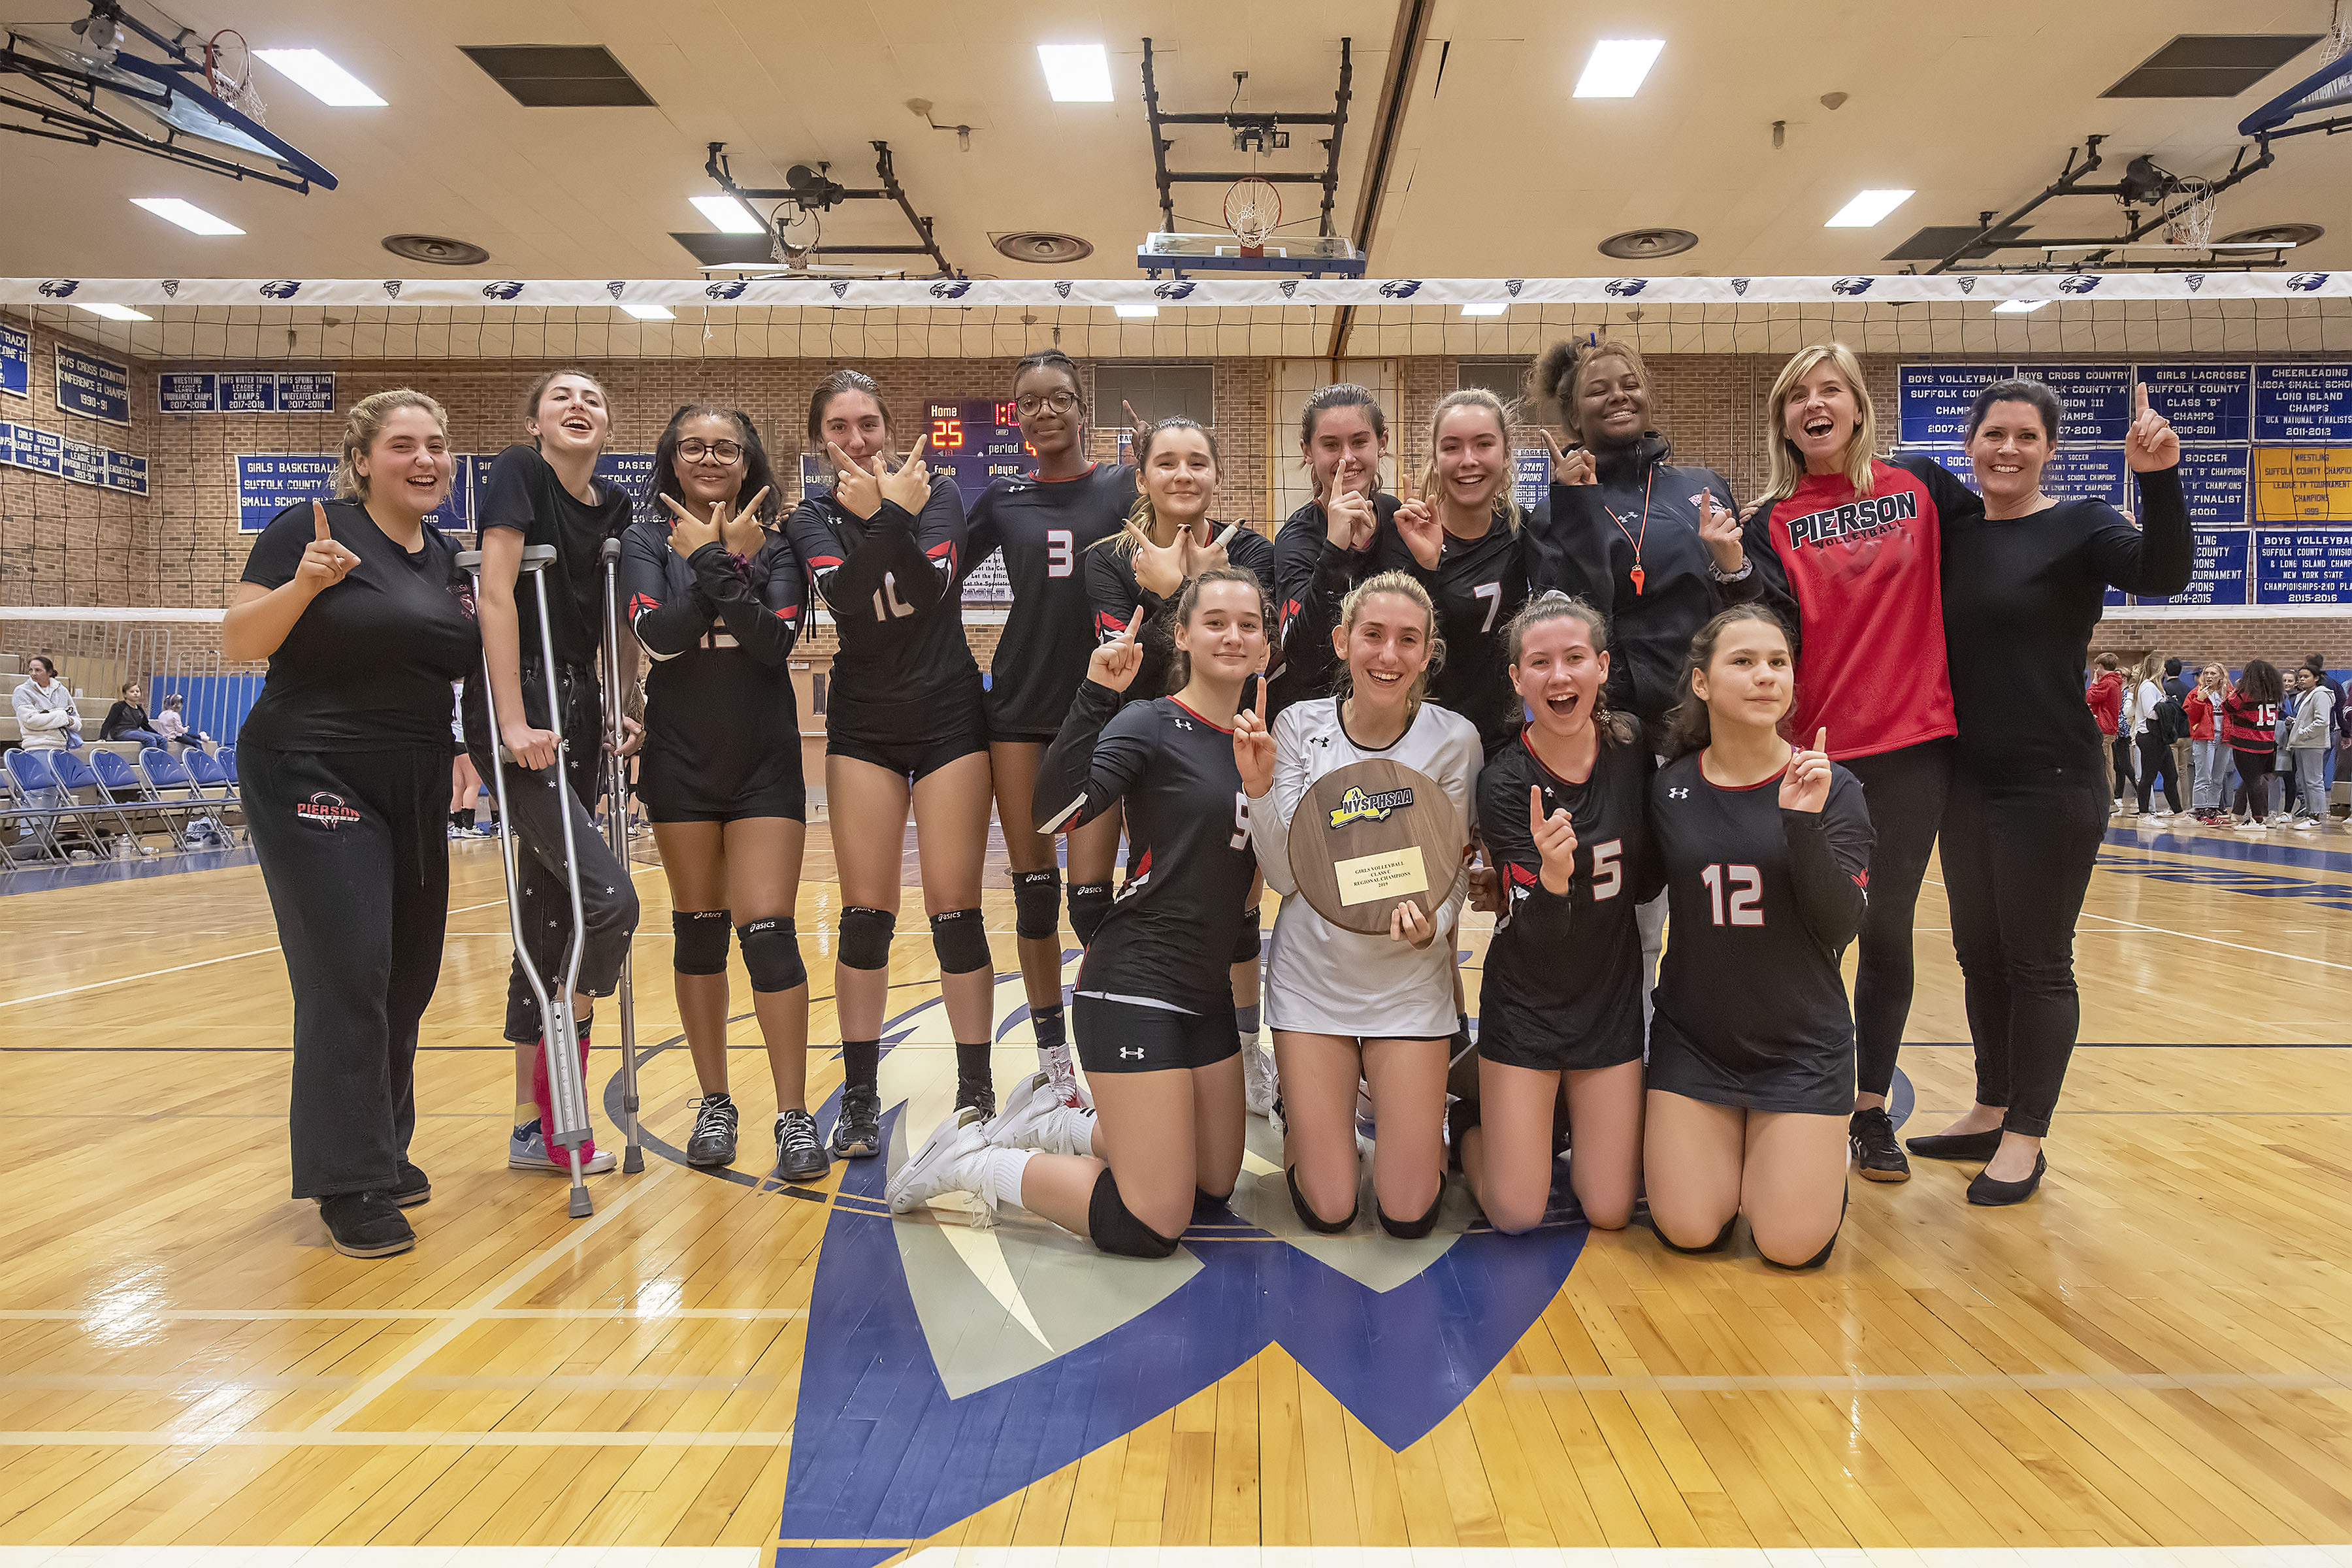 The Pierson Lady Whalers defeated the Oyster Bay Lady Baymen to win the Long Island Class C Volleyball Championship at Hauppauge High School on Saturday night.